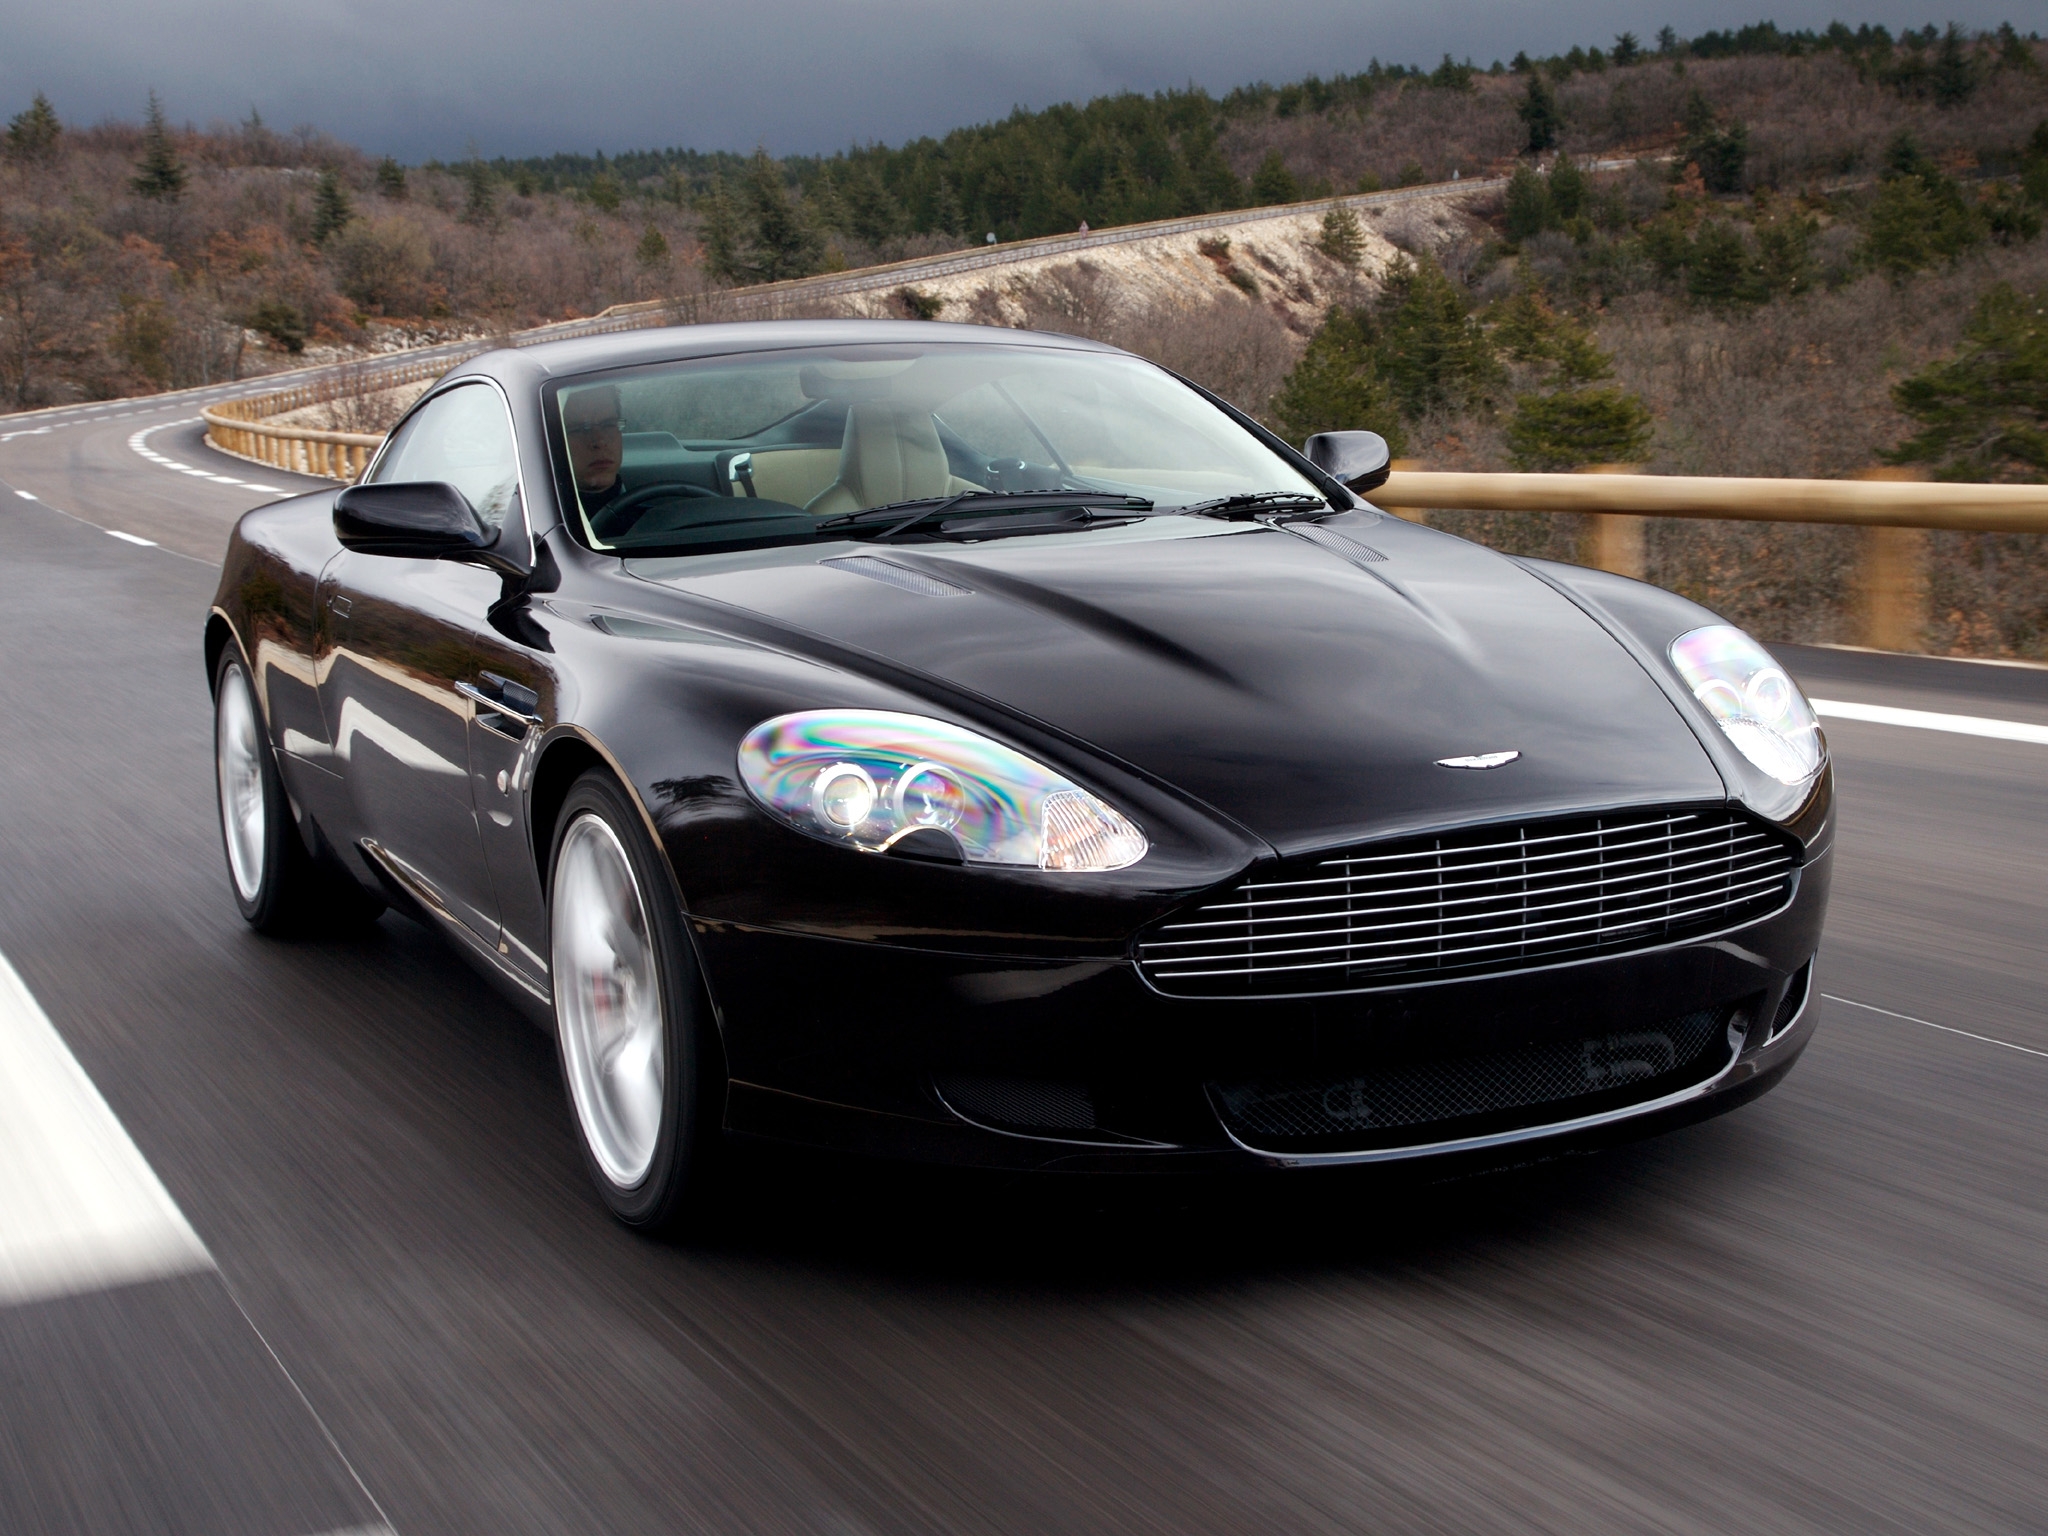 102836 download wallpaper sports, auto, nature, trees, aston martin, cars, black, asphalt, front view, speed, style, db9, 2006 screensavers and pictures for free